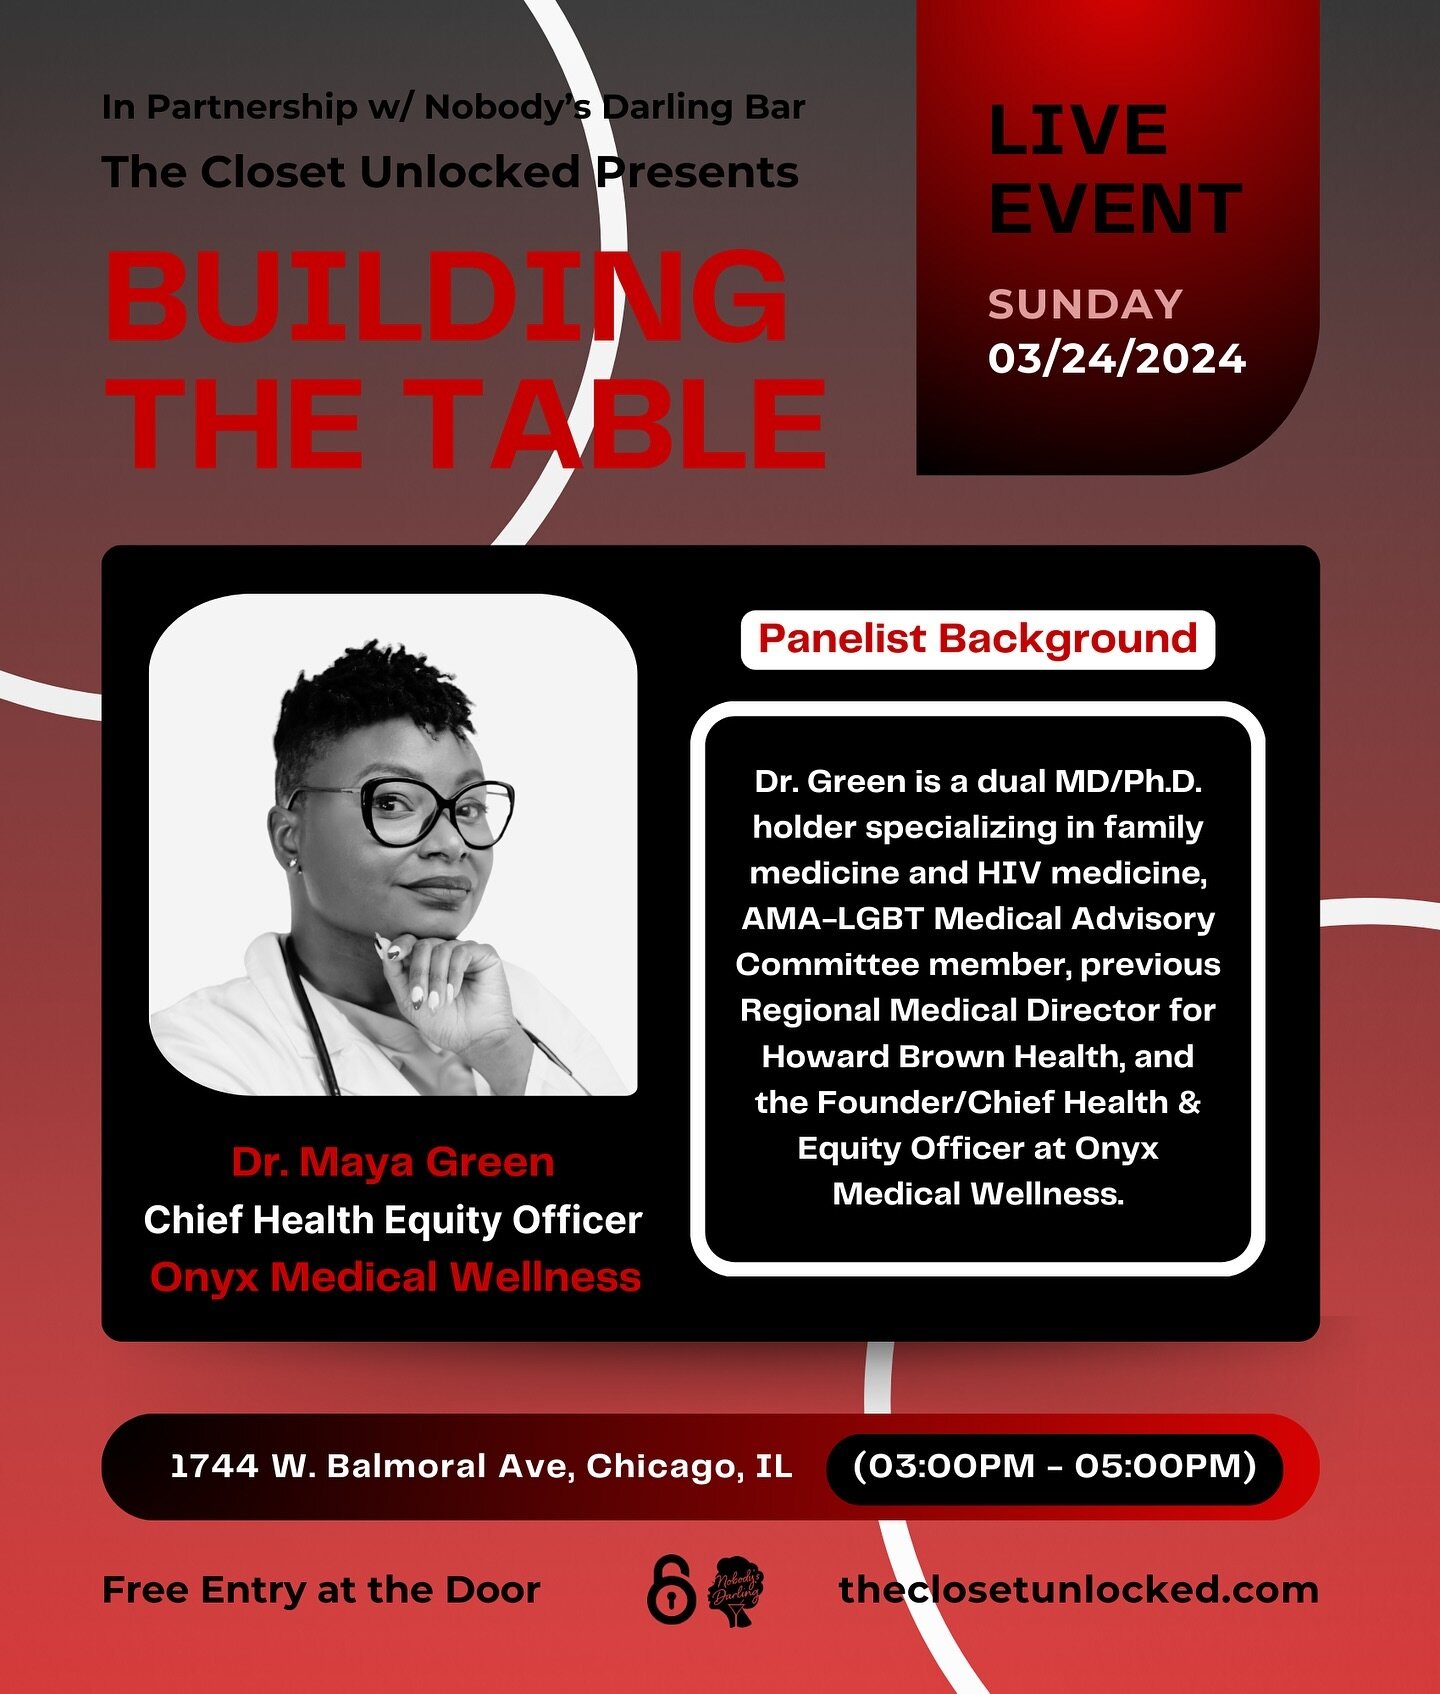 Celebrating #InternationalWomensDay with our first panelist Dr. Maya Green (@drmaya100), Founder and Chief Health Equity Officer of Onyx Medical Wellness (@onyxmedicalwellness) 🩺

Dr. Green is a dual MD/Ph.D. holder specializing in family medicine a